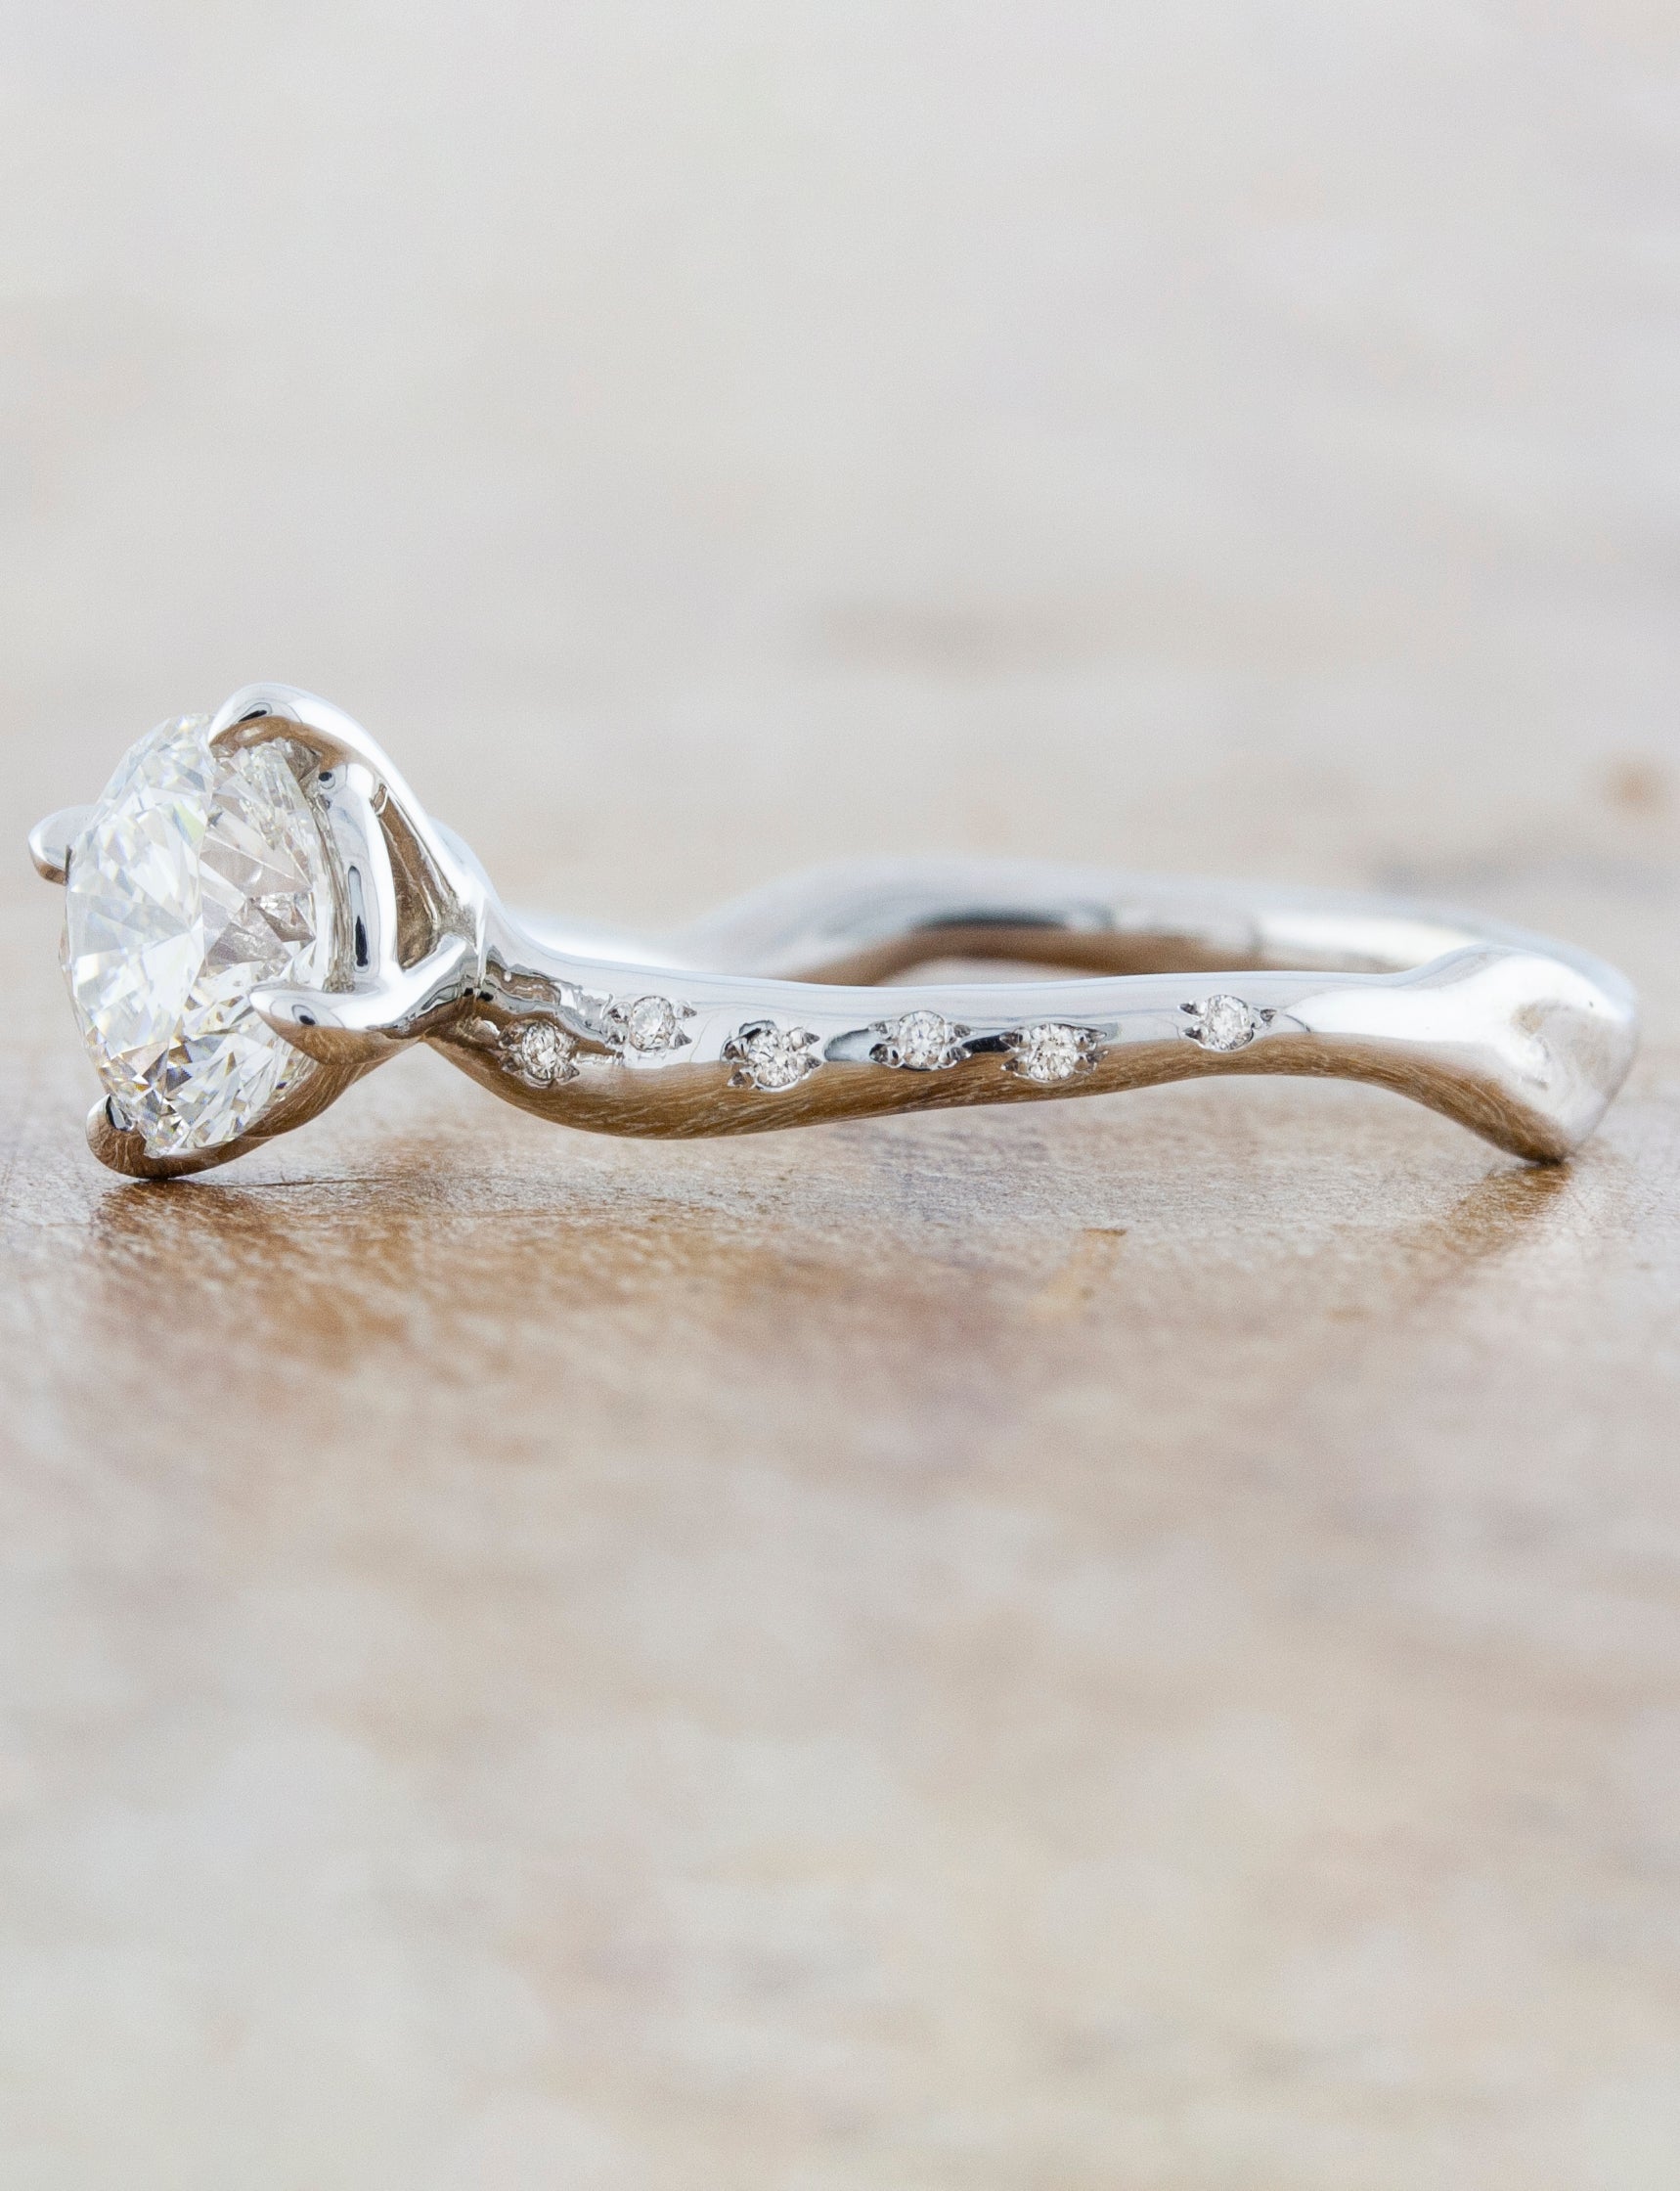 caption:Engagement ring side view